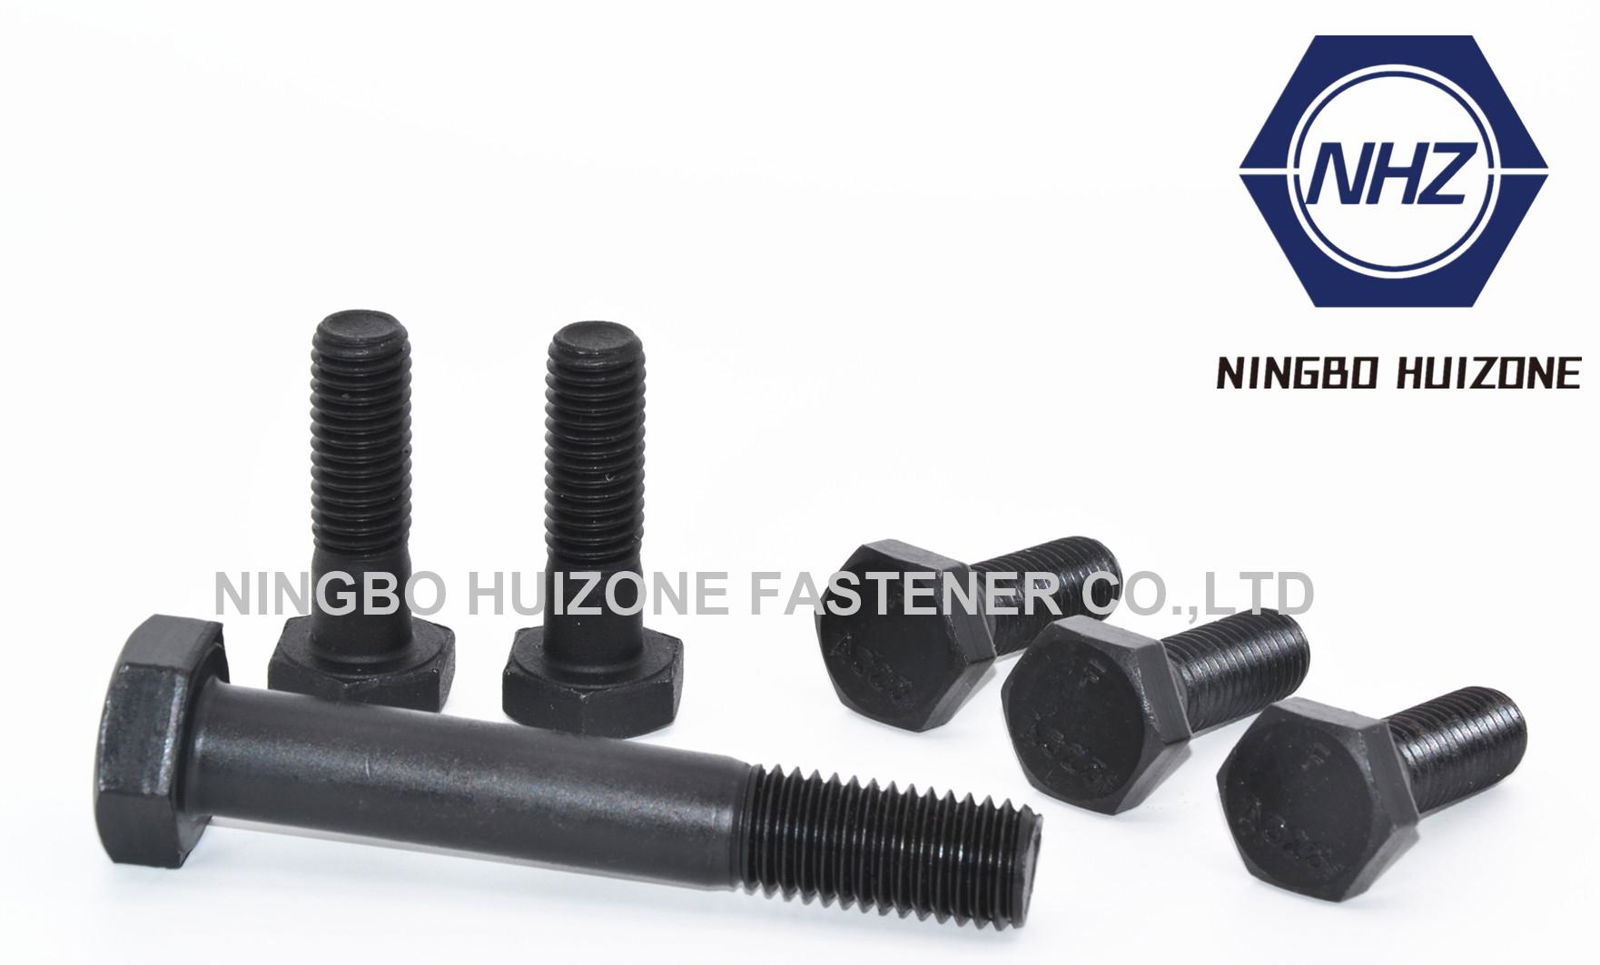 ASTM A325 Heavy Hex Structural Bolts